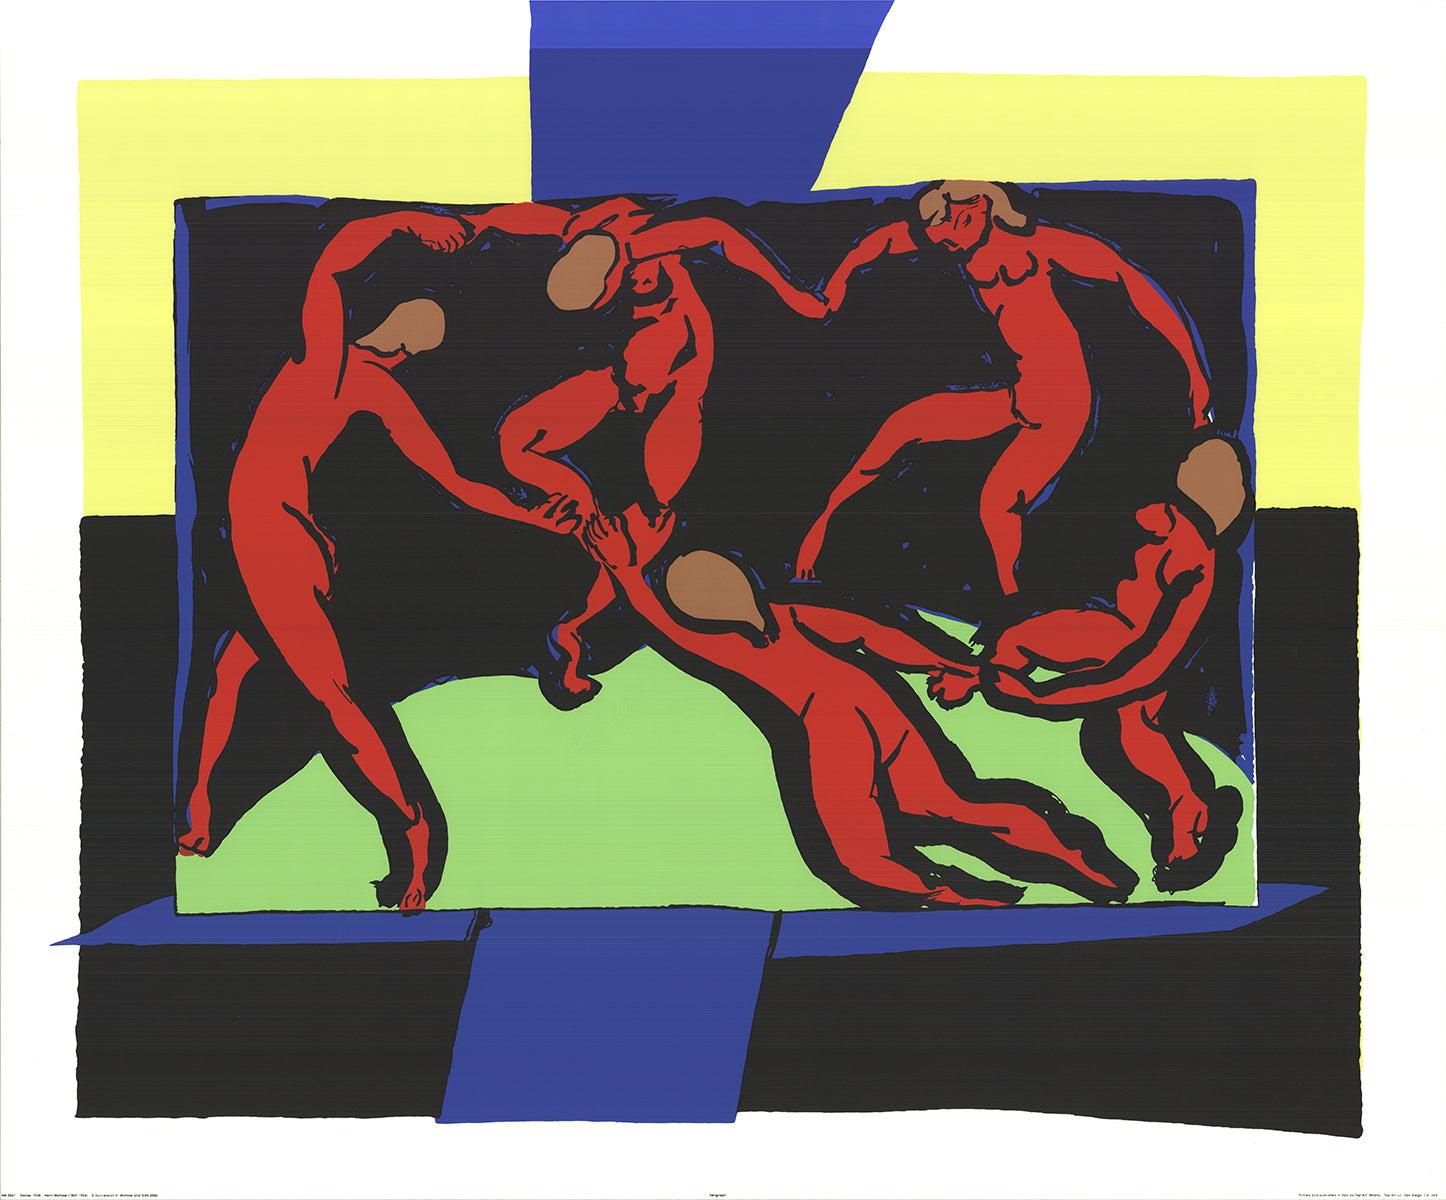 Henri Matisse's "La Danse" is one of the most celebrated and recognizable works of the 20th century. Originally created in 1910, this vibrant and dynamic composition captures the essence of movement and joy, featuring five nudes holding hands in a